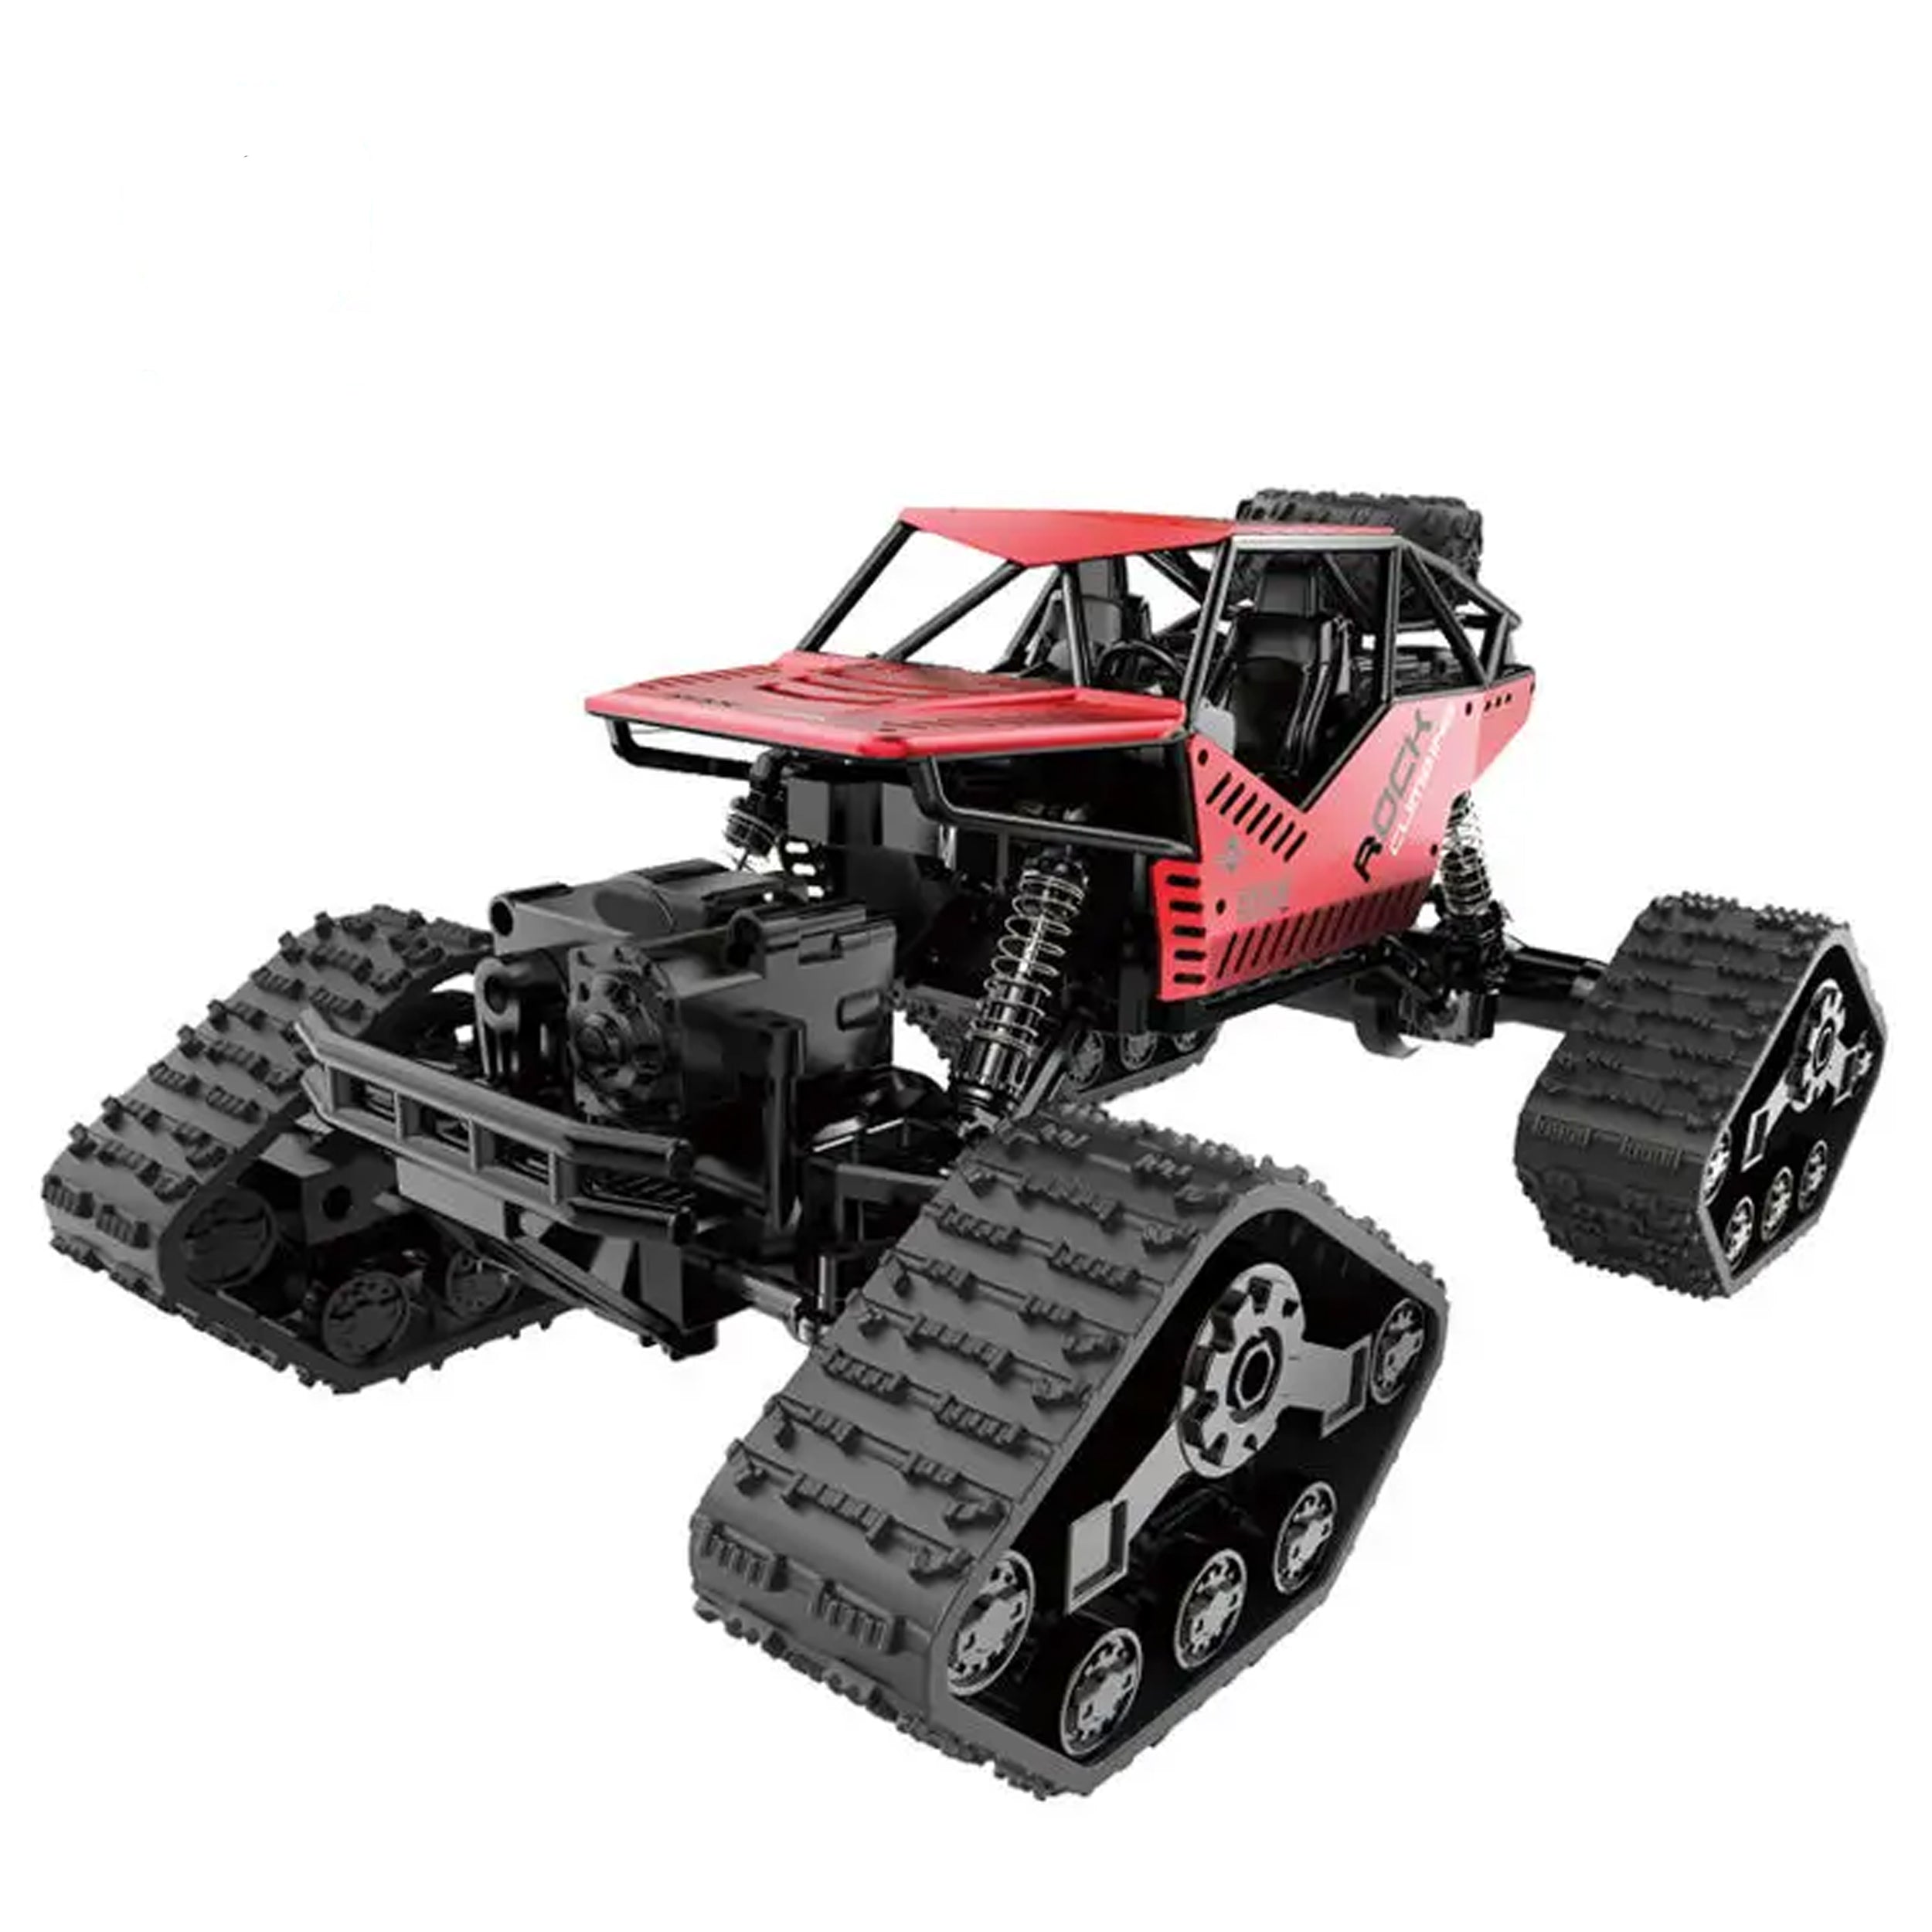 Monster Truck Remote Control Car Toys for Kids - A Perfect Toy for Adventure-Loving Kids